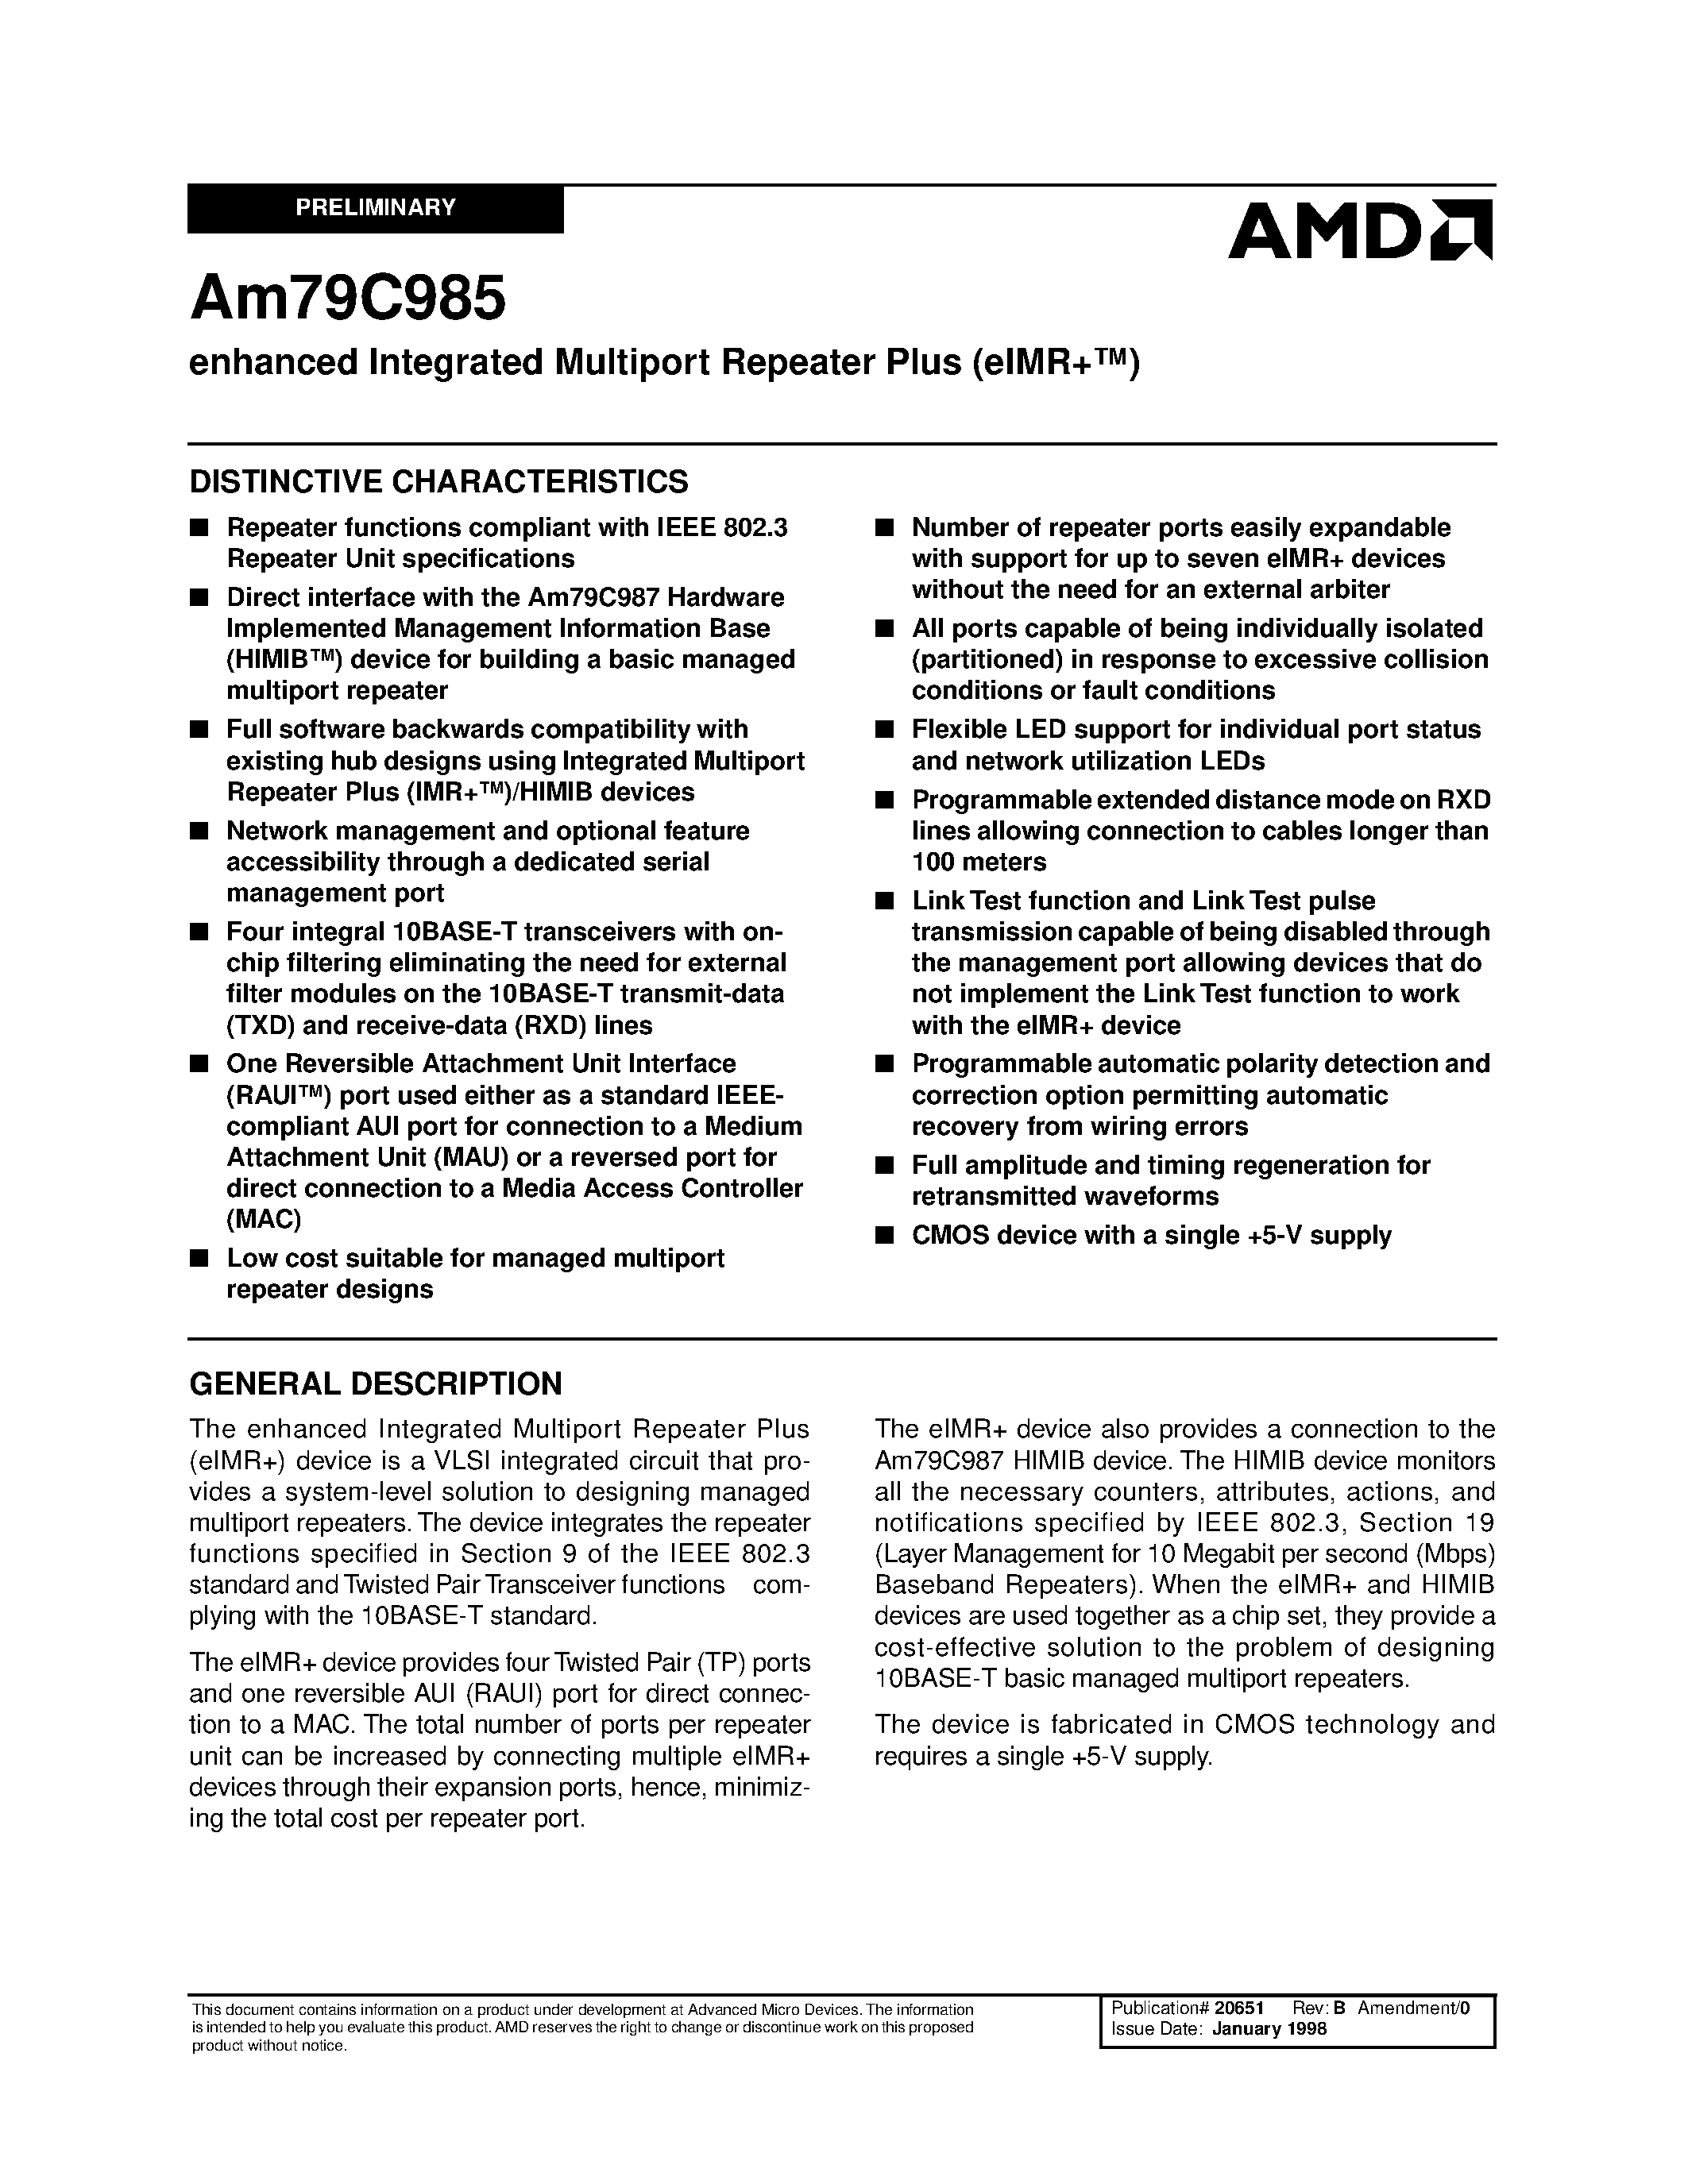 Datasheet AM79C985 - enhanced Integrated Multiport Repeater Plus (eIMR+) page 1